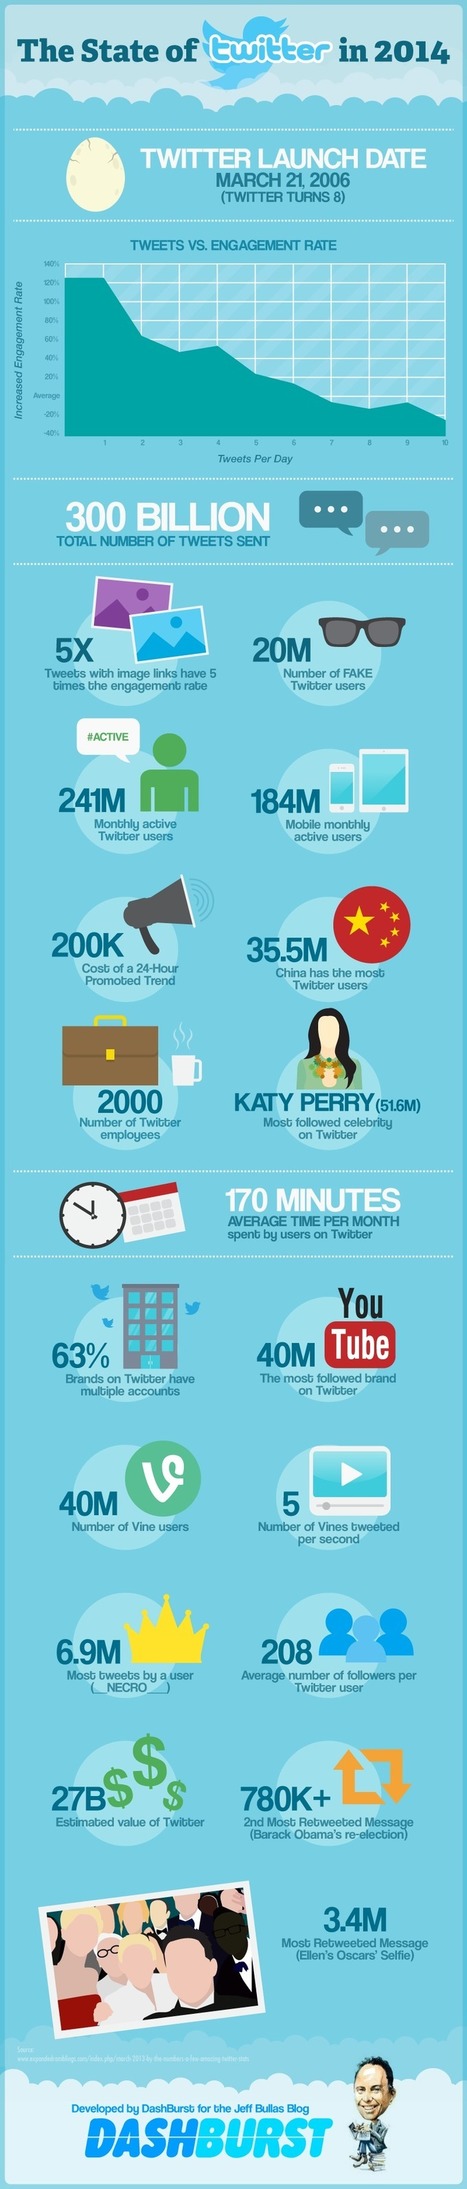 15 Twitter Facts and Figures for 2014 You Need to Know - Jeffbullas's Blog | digital marketing strategy | Scoop.it